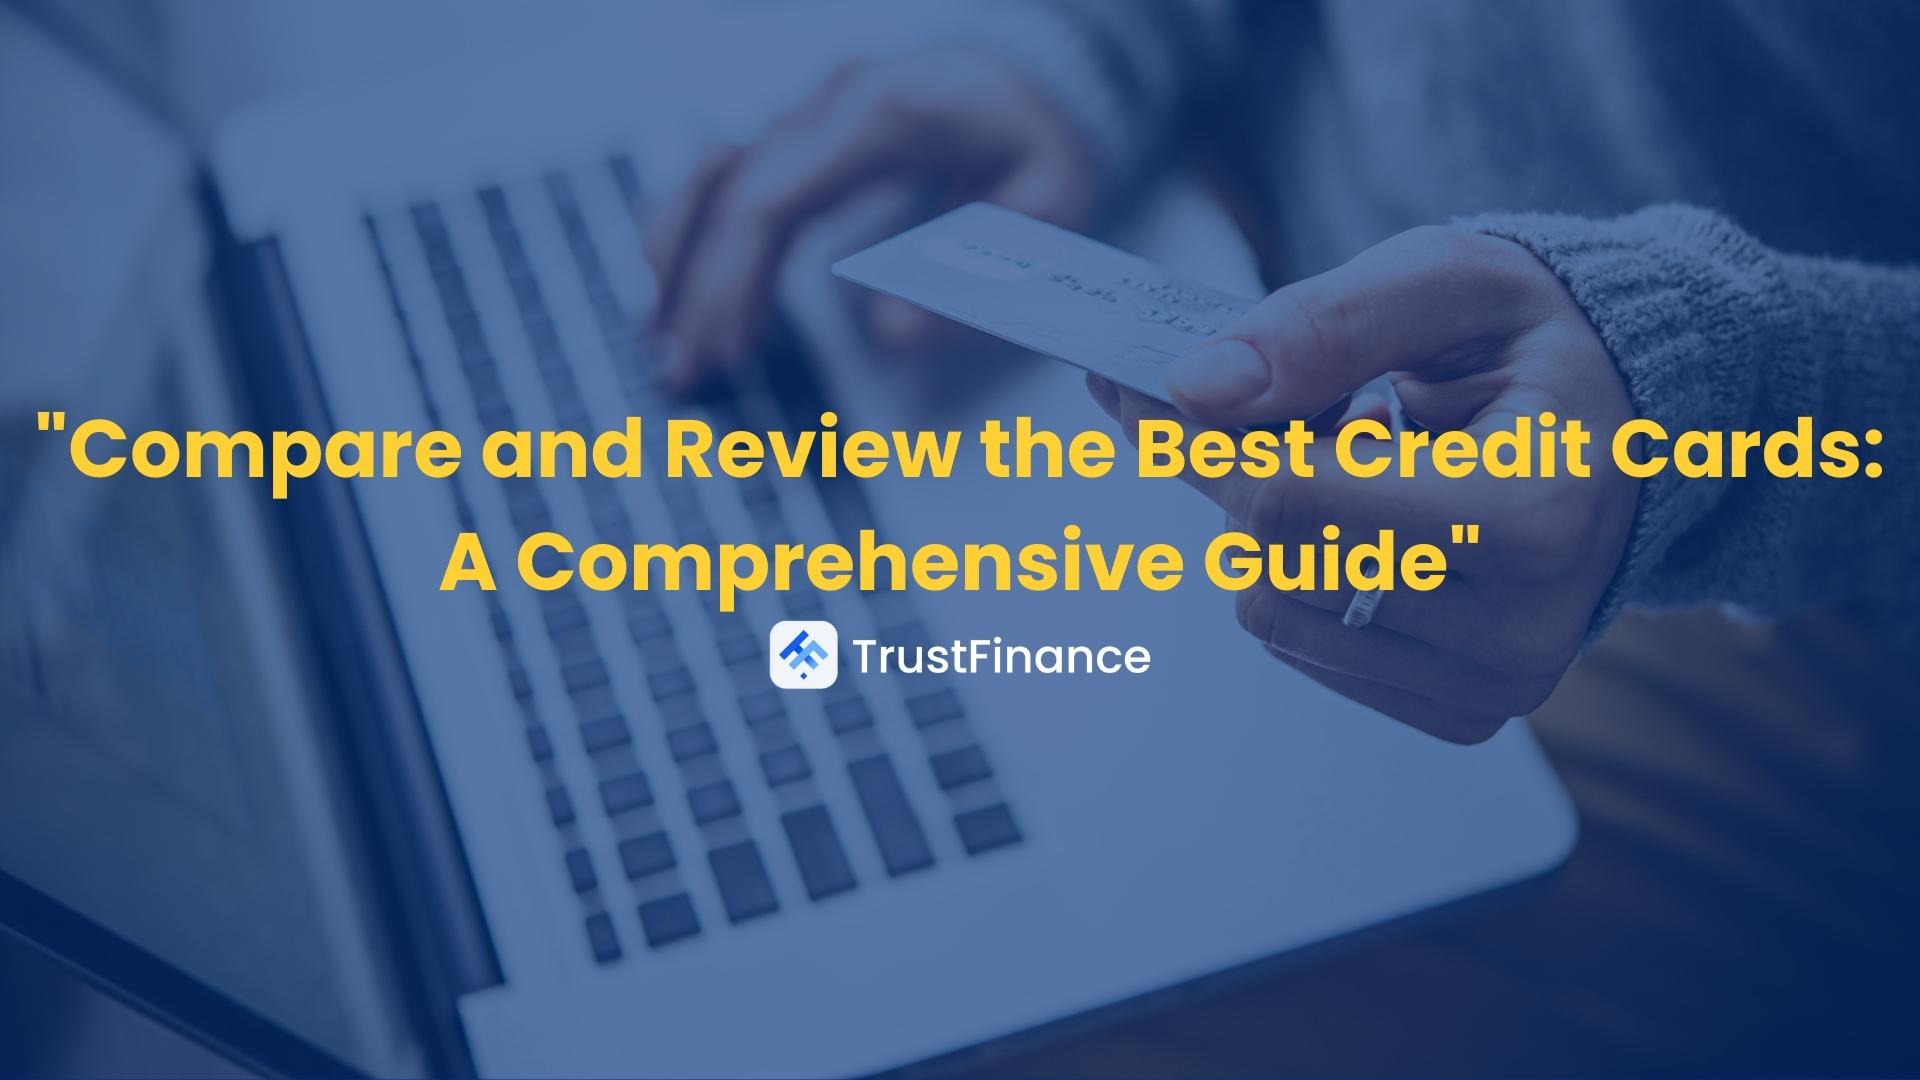 Compare and Review the Best Credit Cards